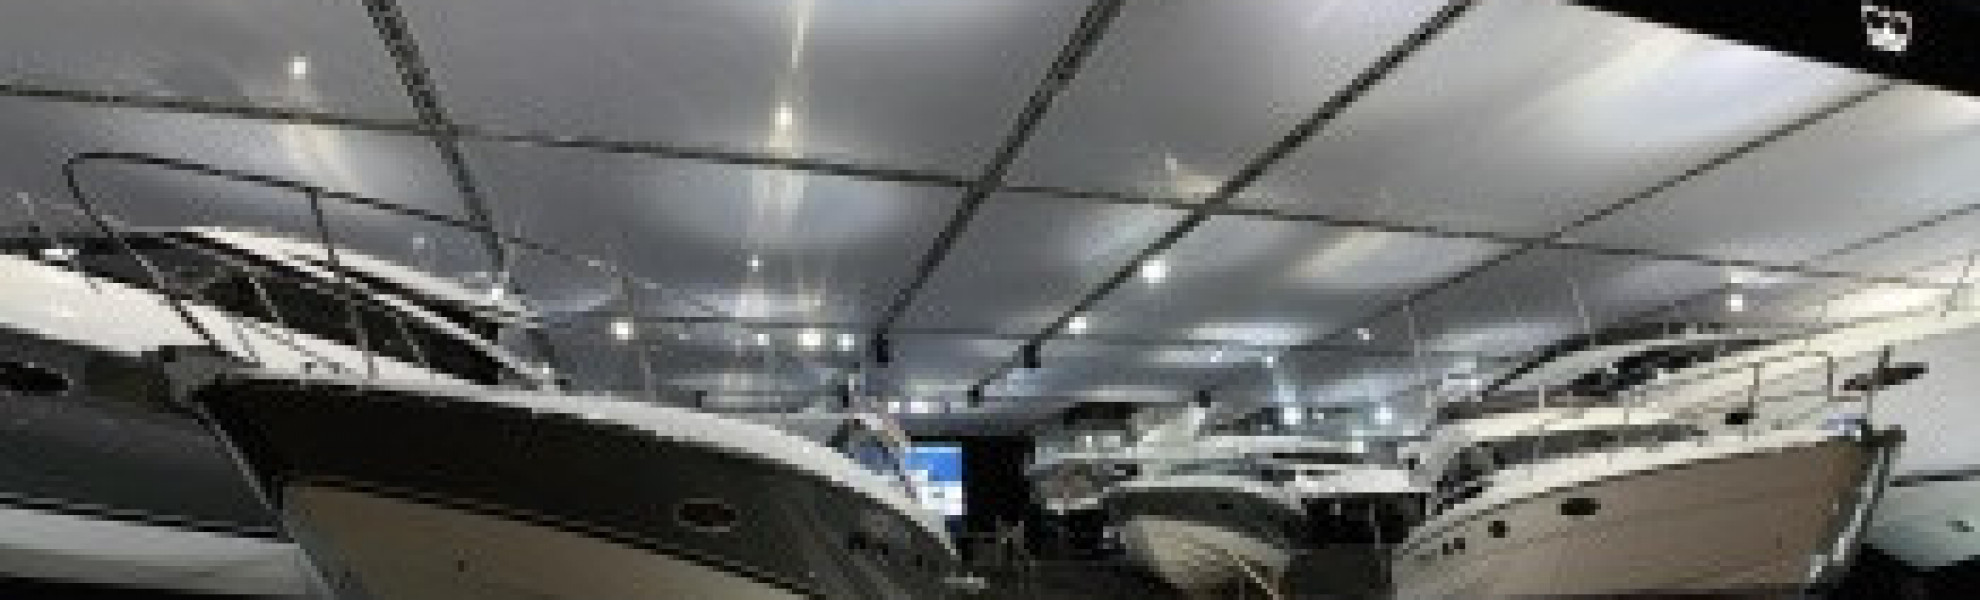 London Boat Show ( 12th - 20th January 2013)